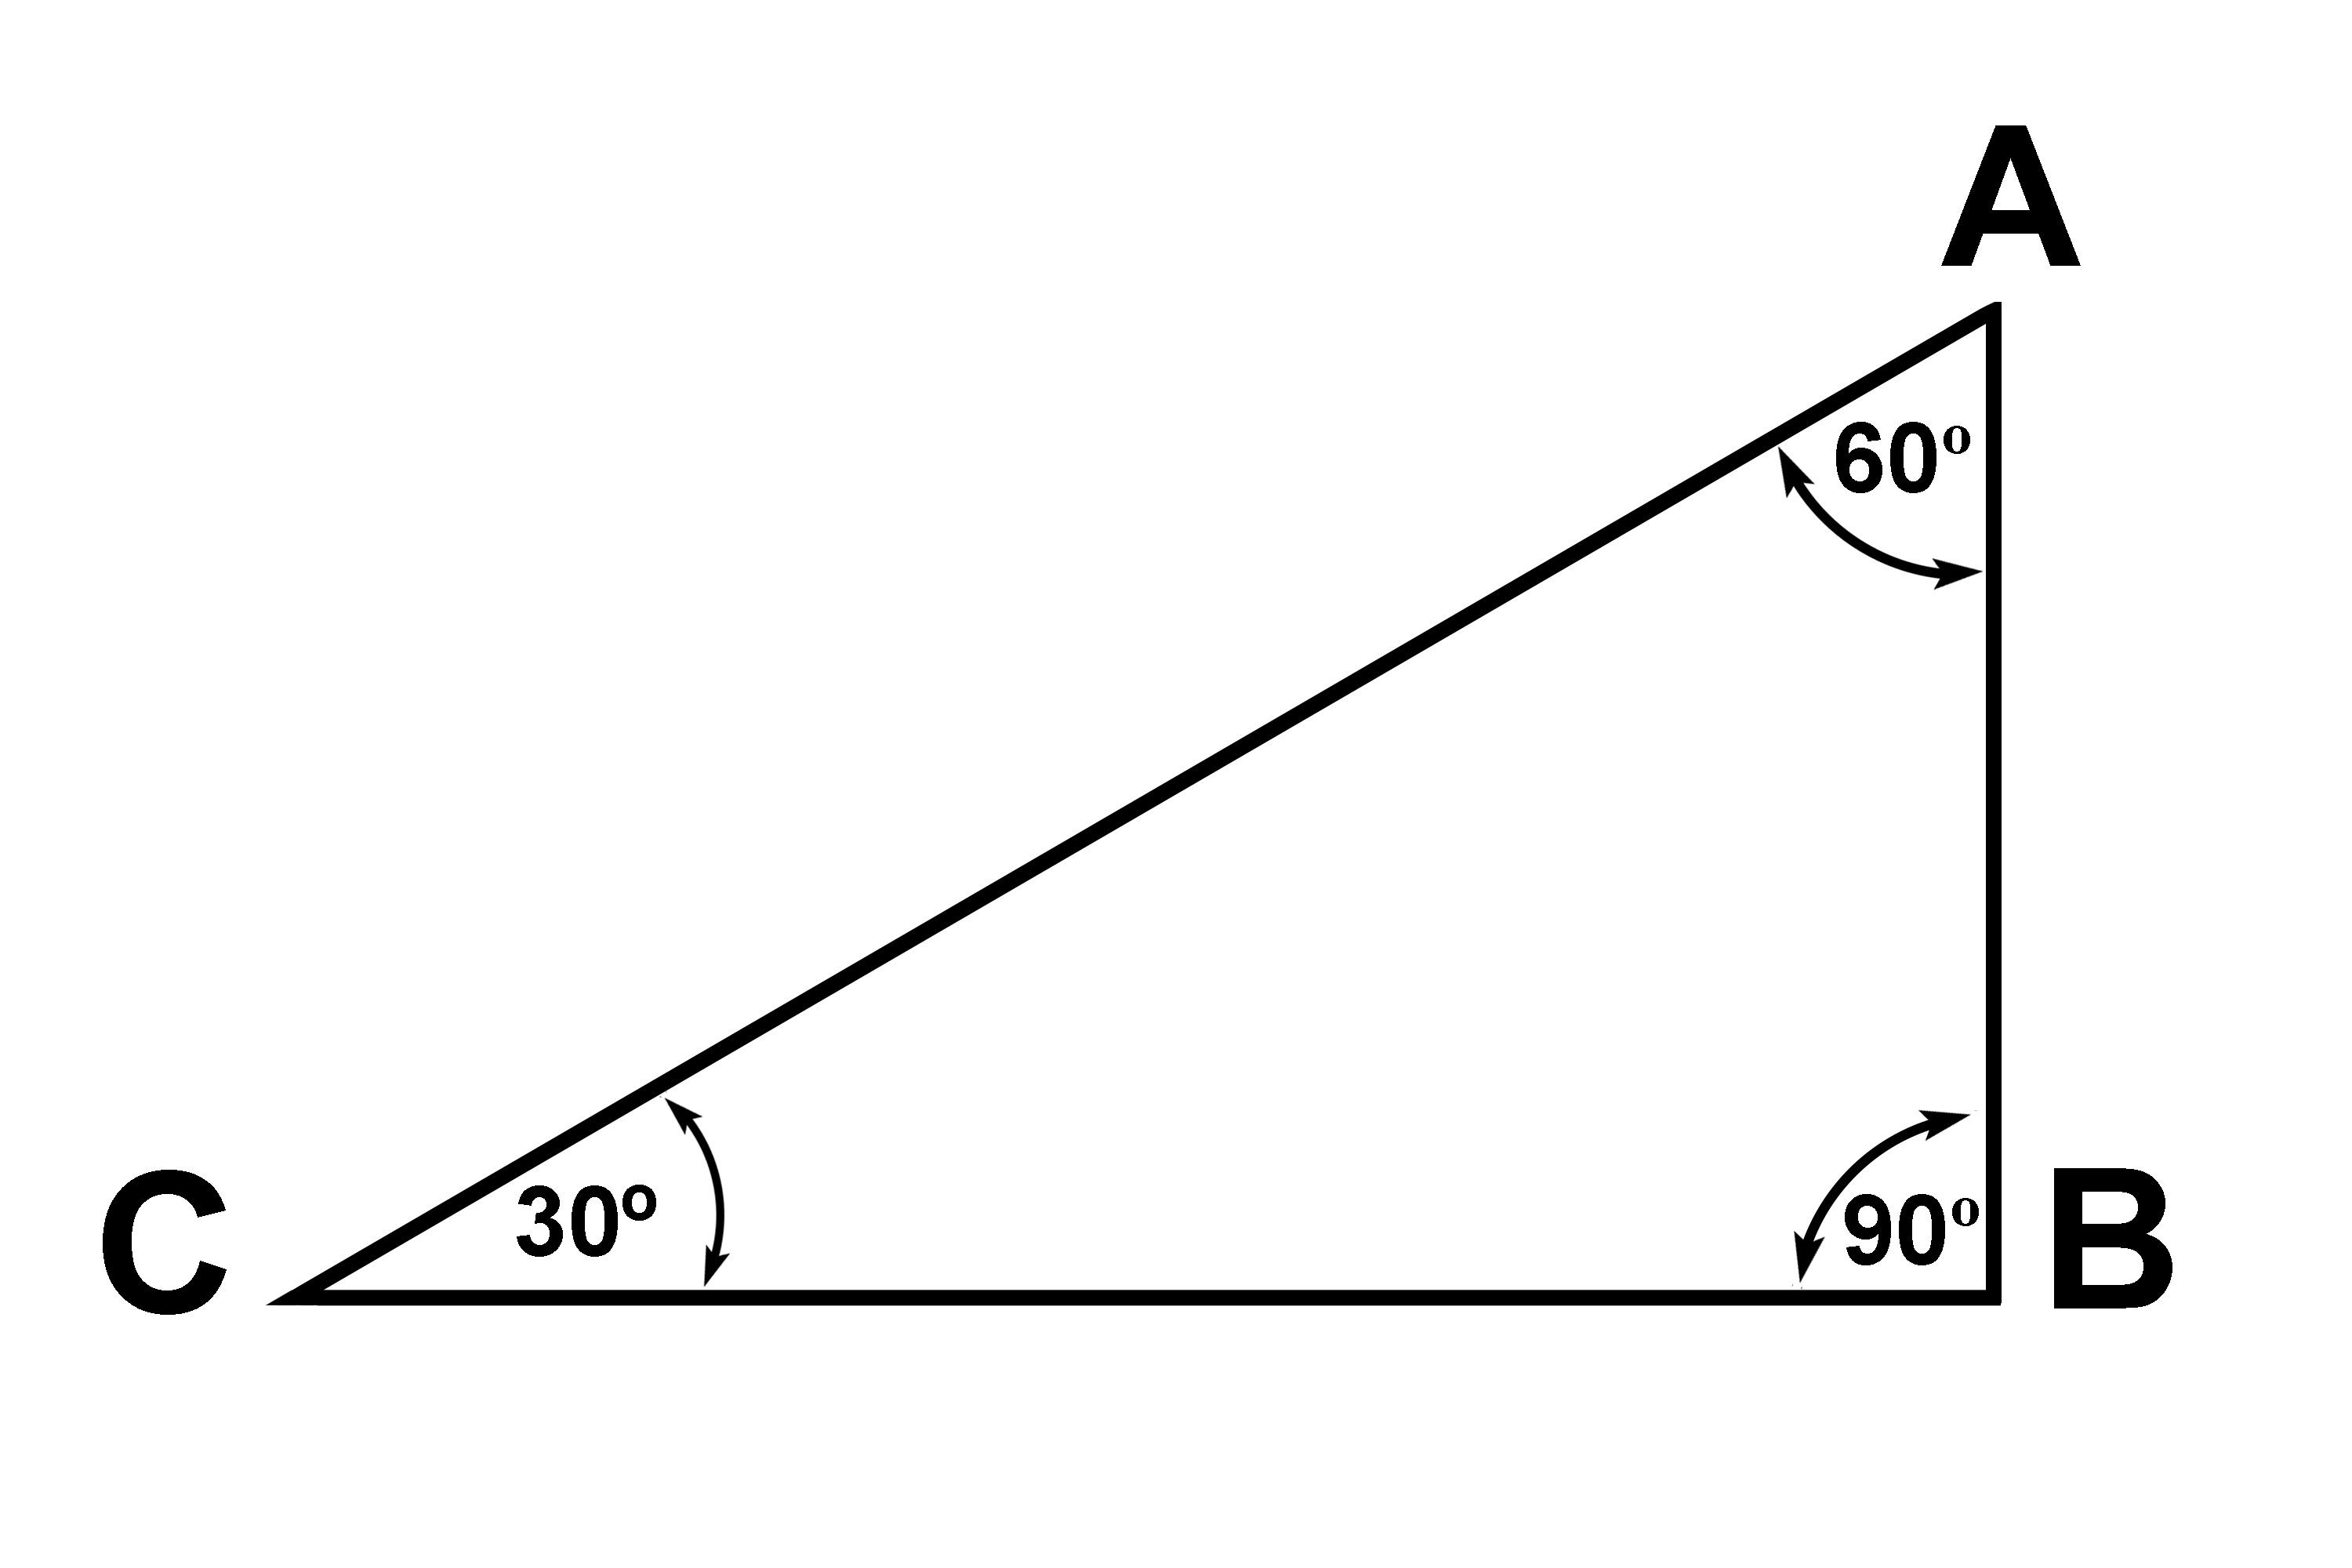 The total angles of a triangle equals 180 degrees